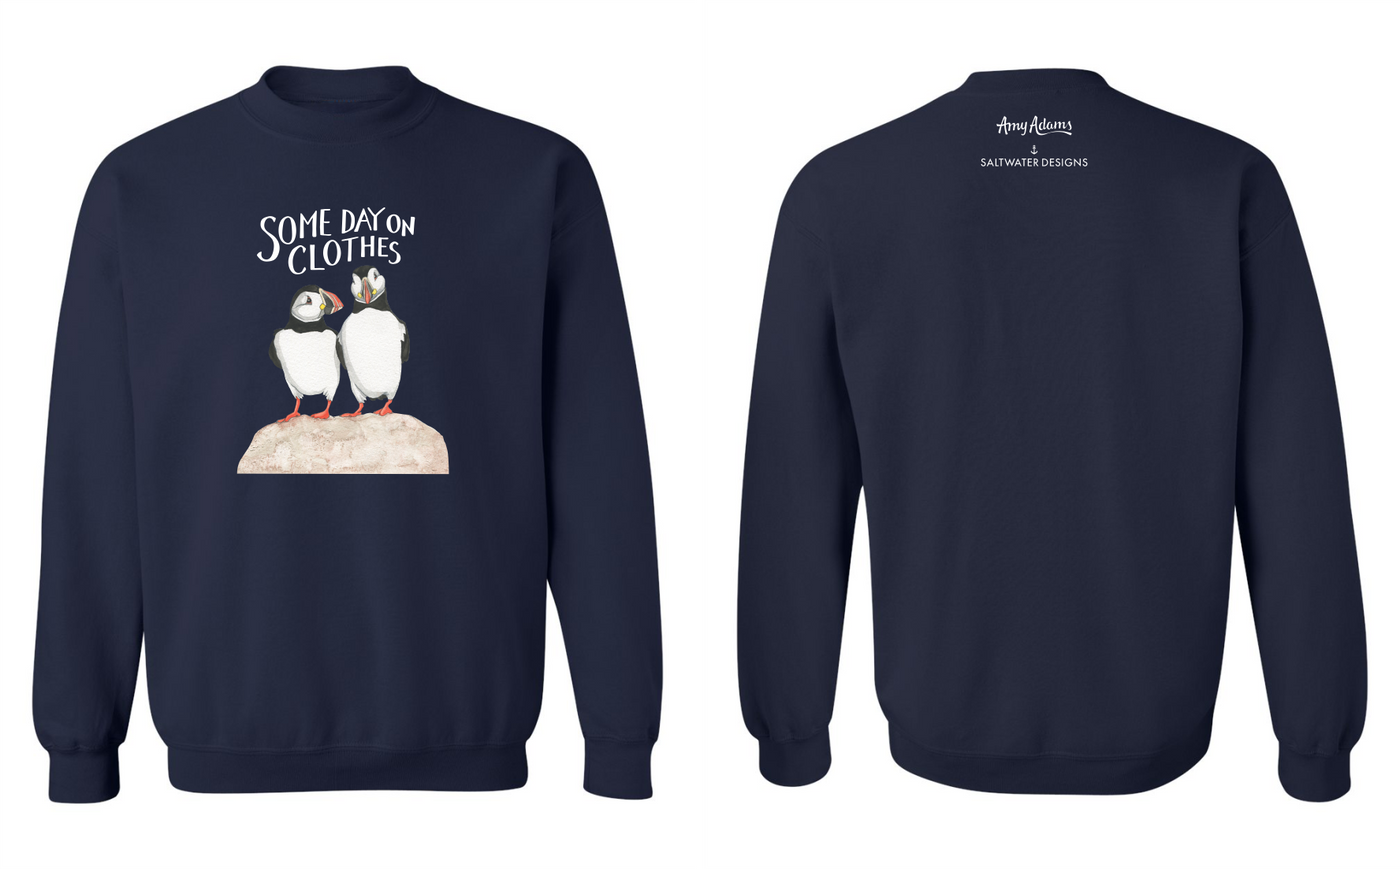 Amy Adams "Some Day on Clothes" Puffin Pair Unisex Crewneck Sweatshirt